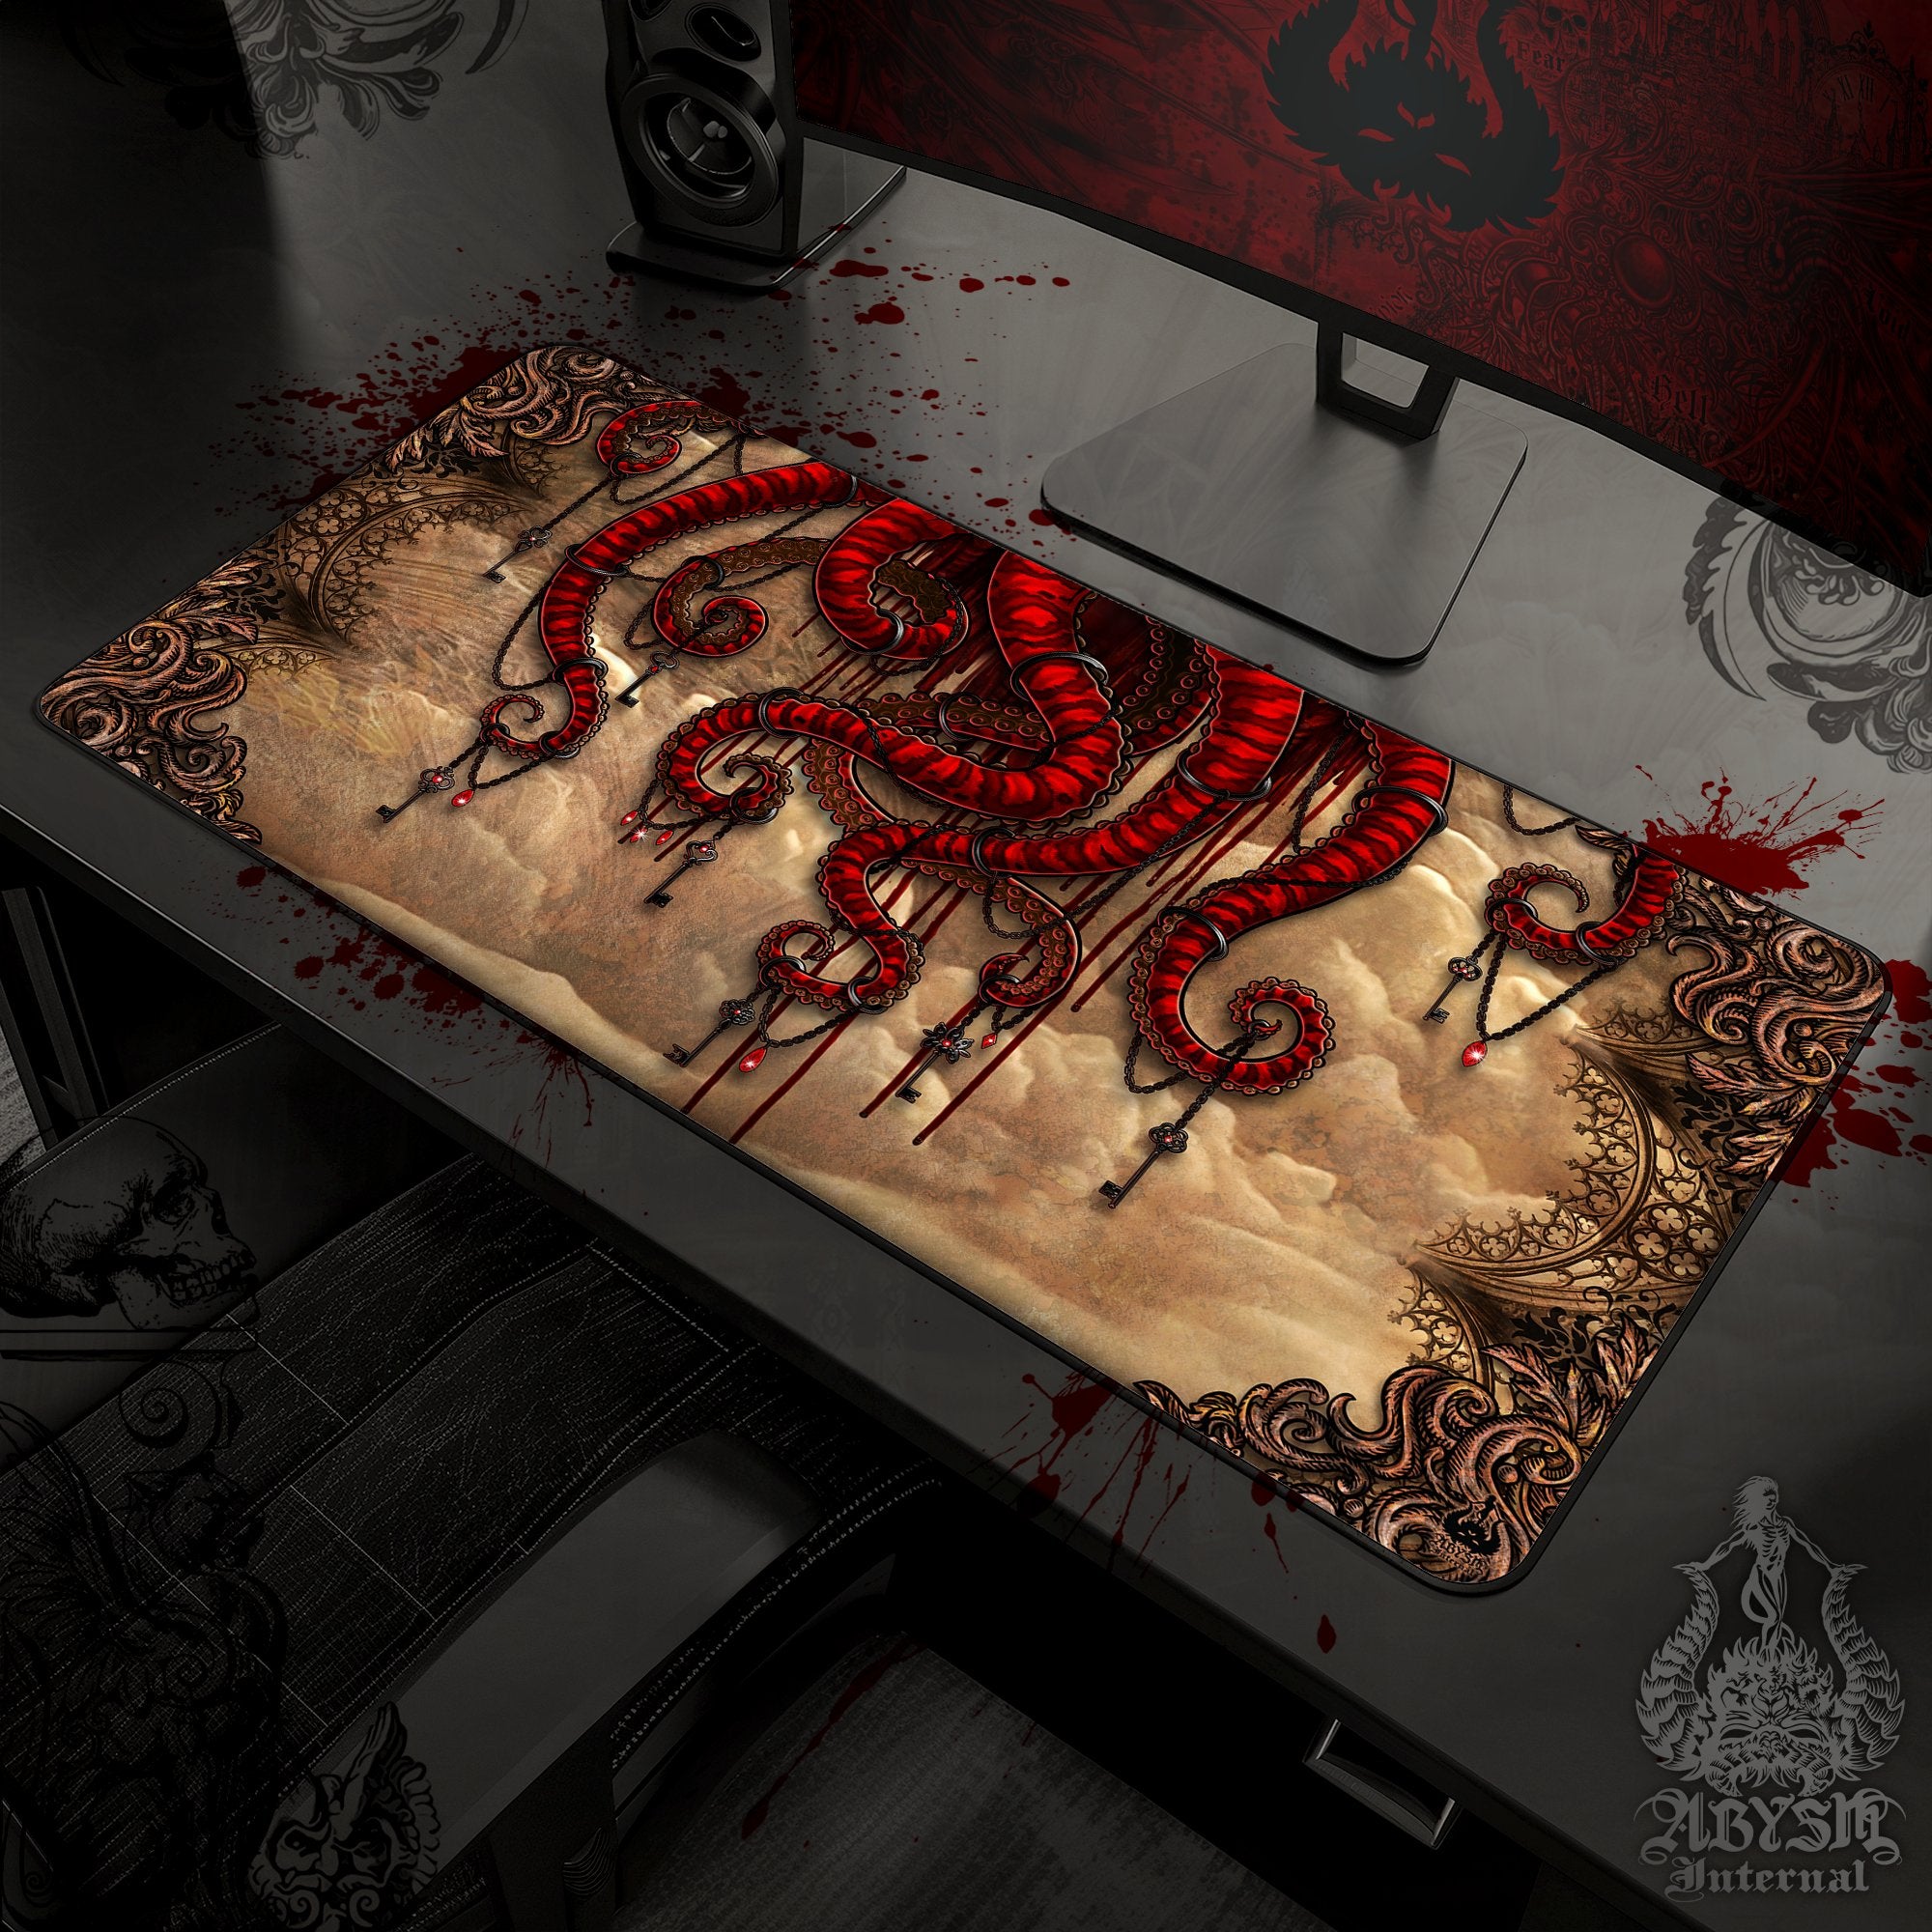 Goth Horror Desk Mat, Octopus Gaming Mouse Pad, Gothic Gamer Table Protector Cover, Tentacles Workpad, Fantasy Art Print - 2 Colors - Abysm Internal